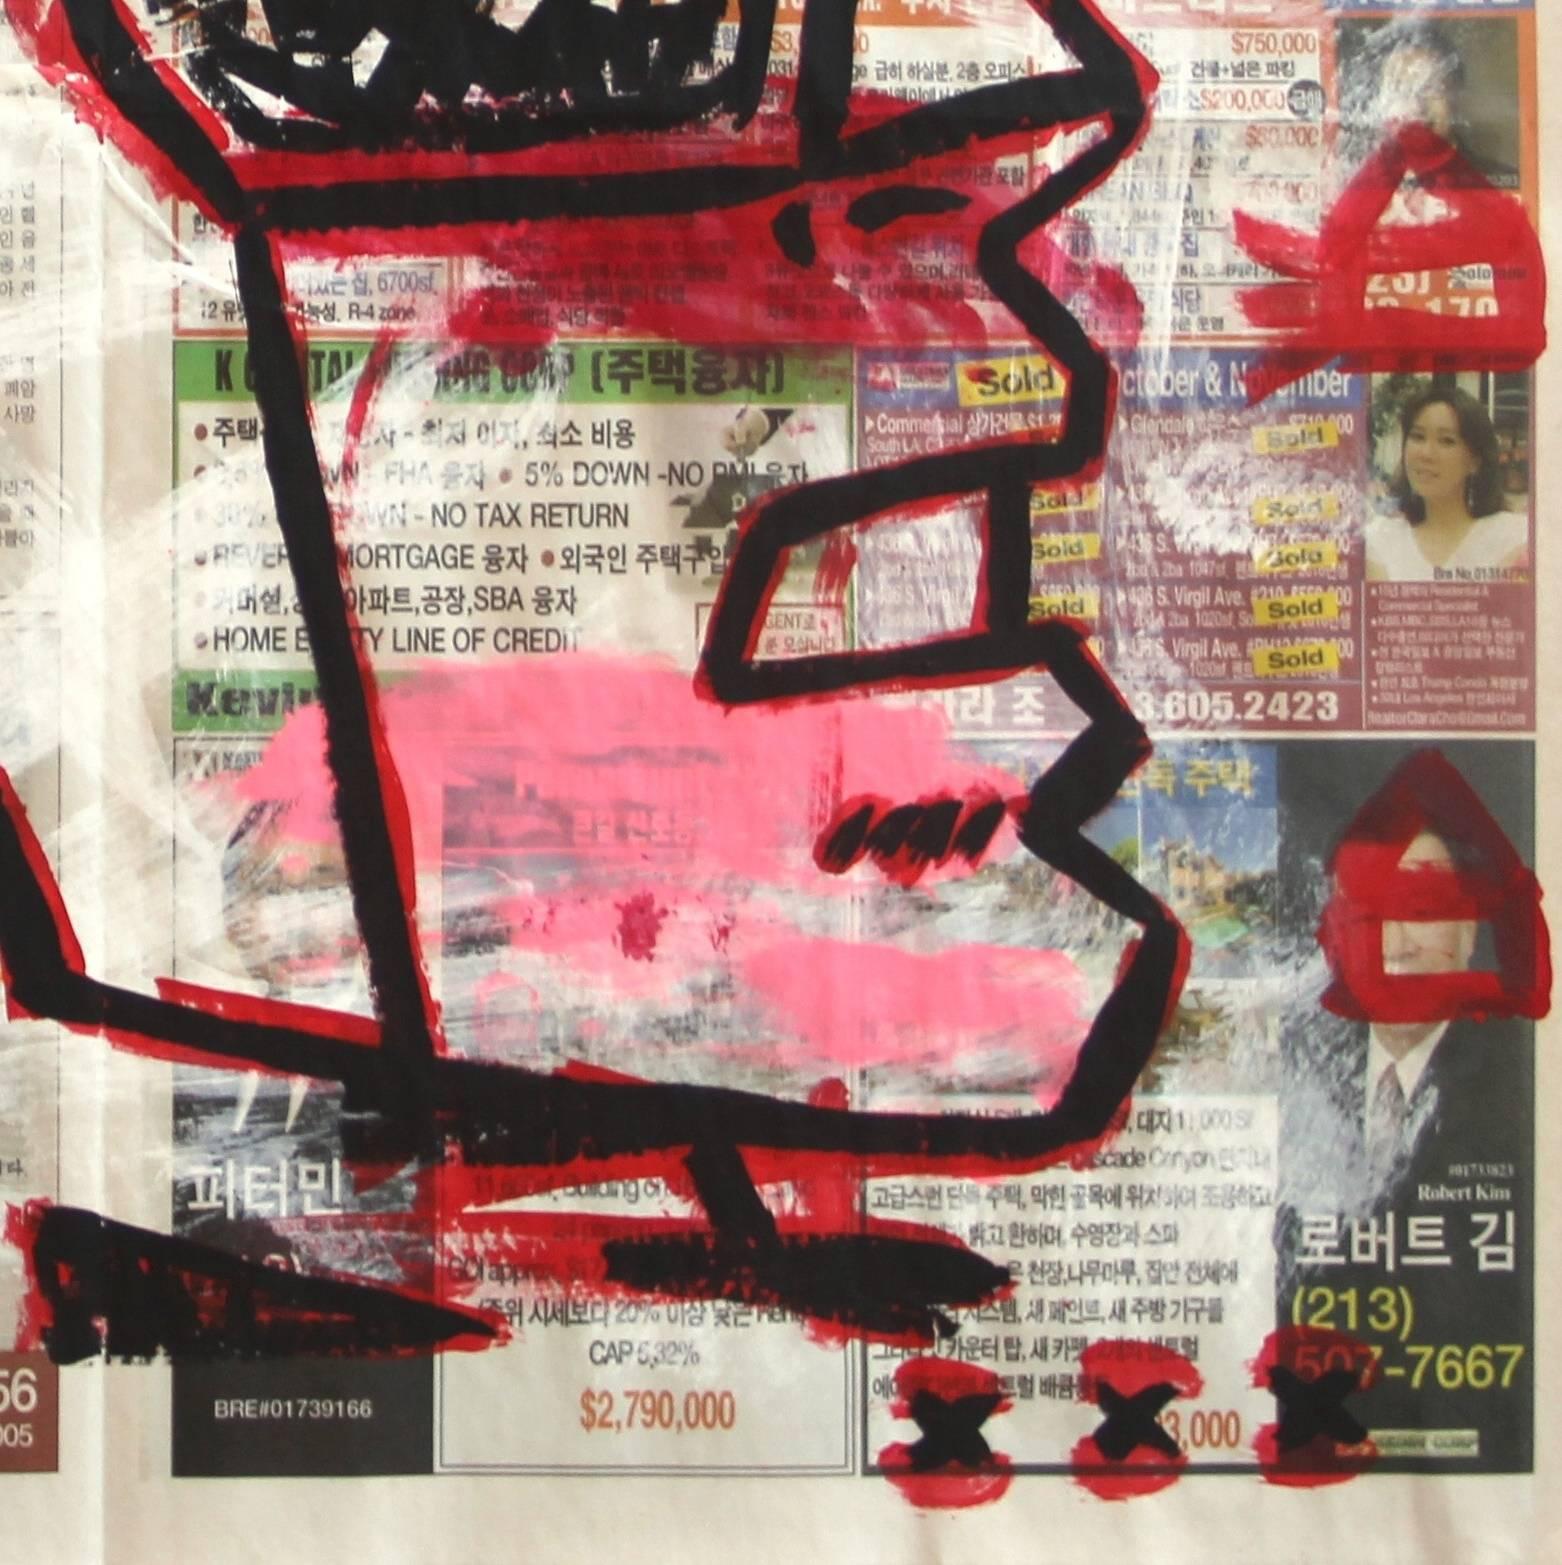 Los Angeles street artist Gary John exploded onto the international art scene first during Art Basel Miami in 2013. John’s playfully bold work quickly gained attention and he was named one of 20 standout artists at the 2014 NY Affordable Art Fair.